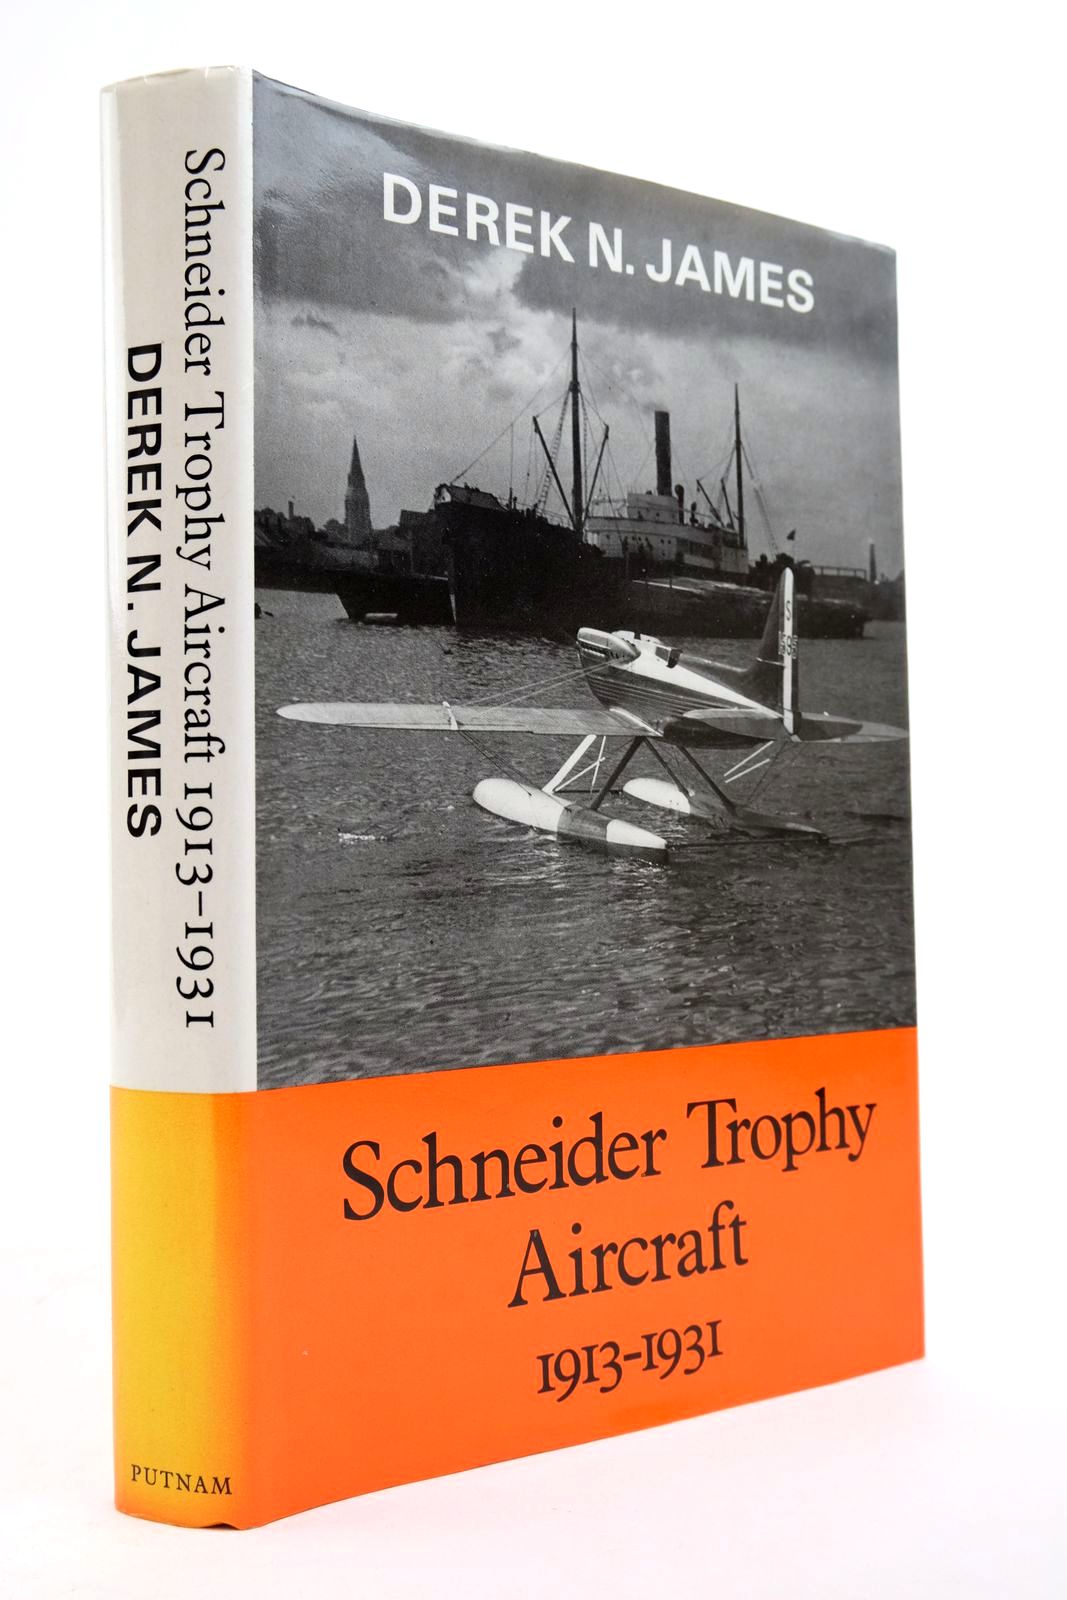 Photo of SCHNEIDER TROPHY AIRCRAFT 1913-1931 written by James, Derek N. published by Putnam (STOCK CODE: 2139104)  for sale by Stella & Rose's Books